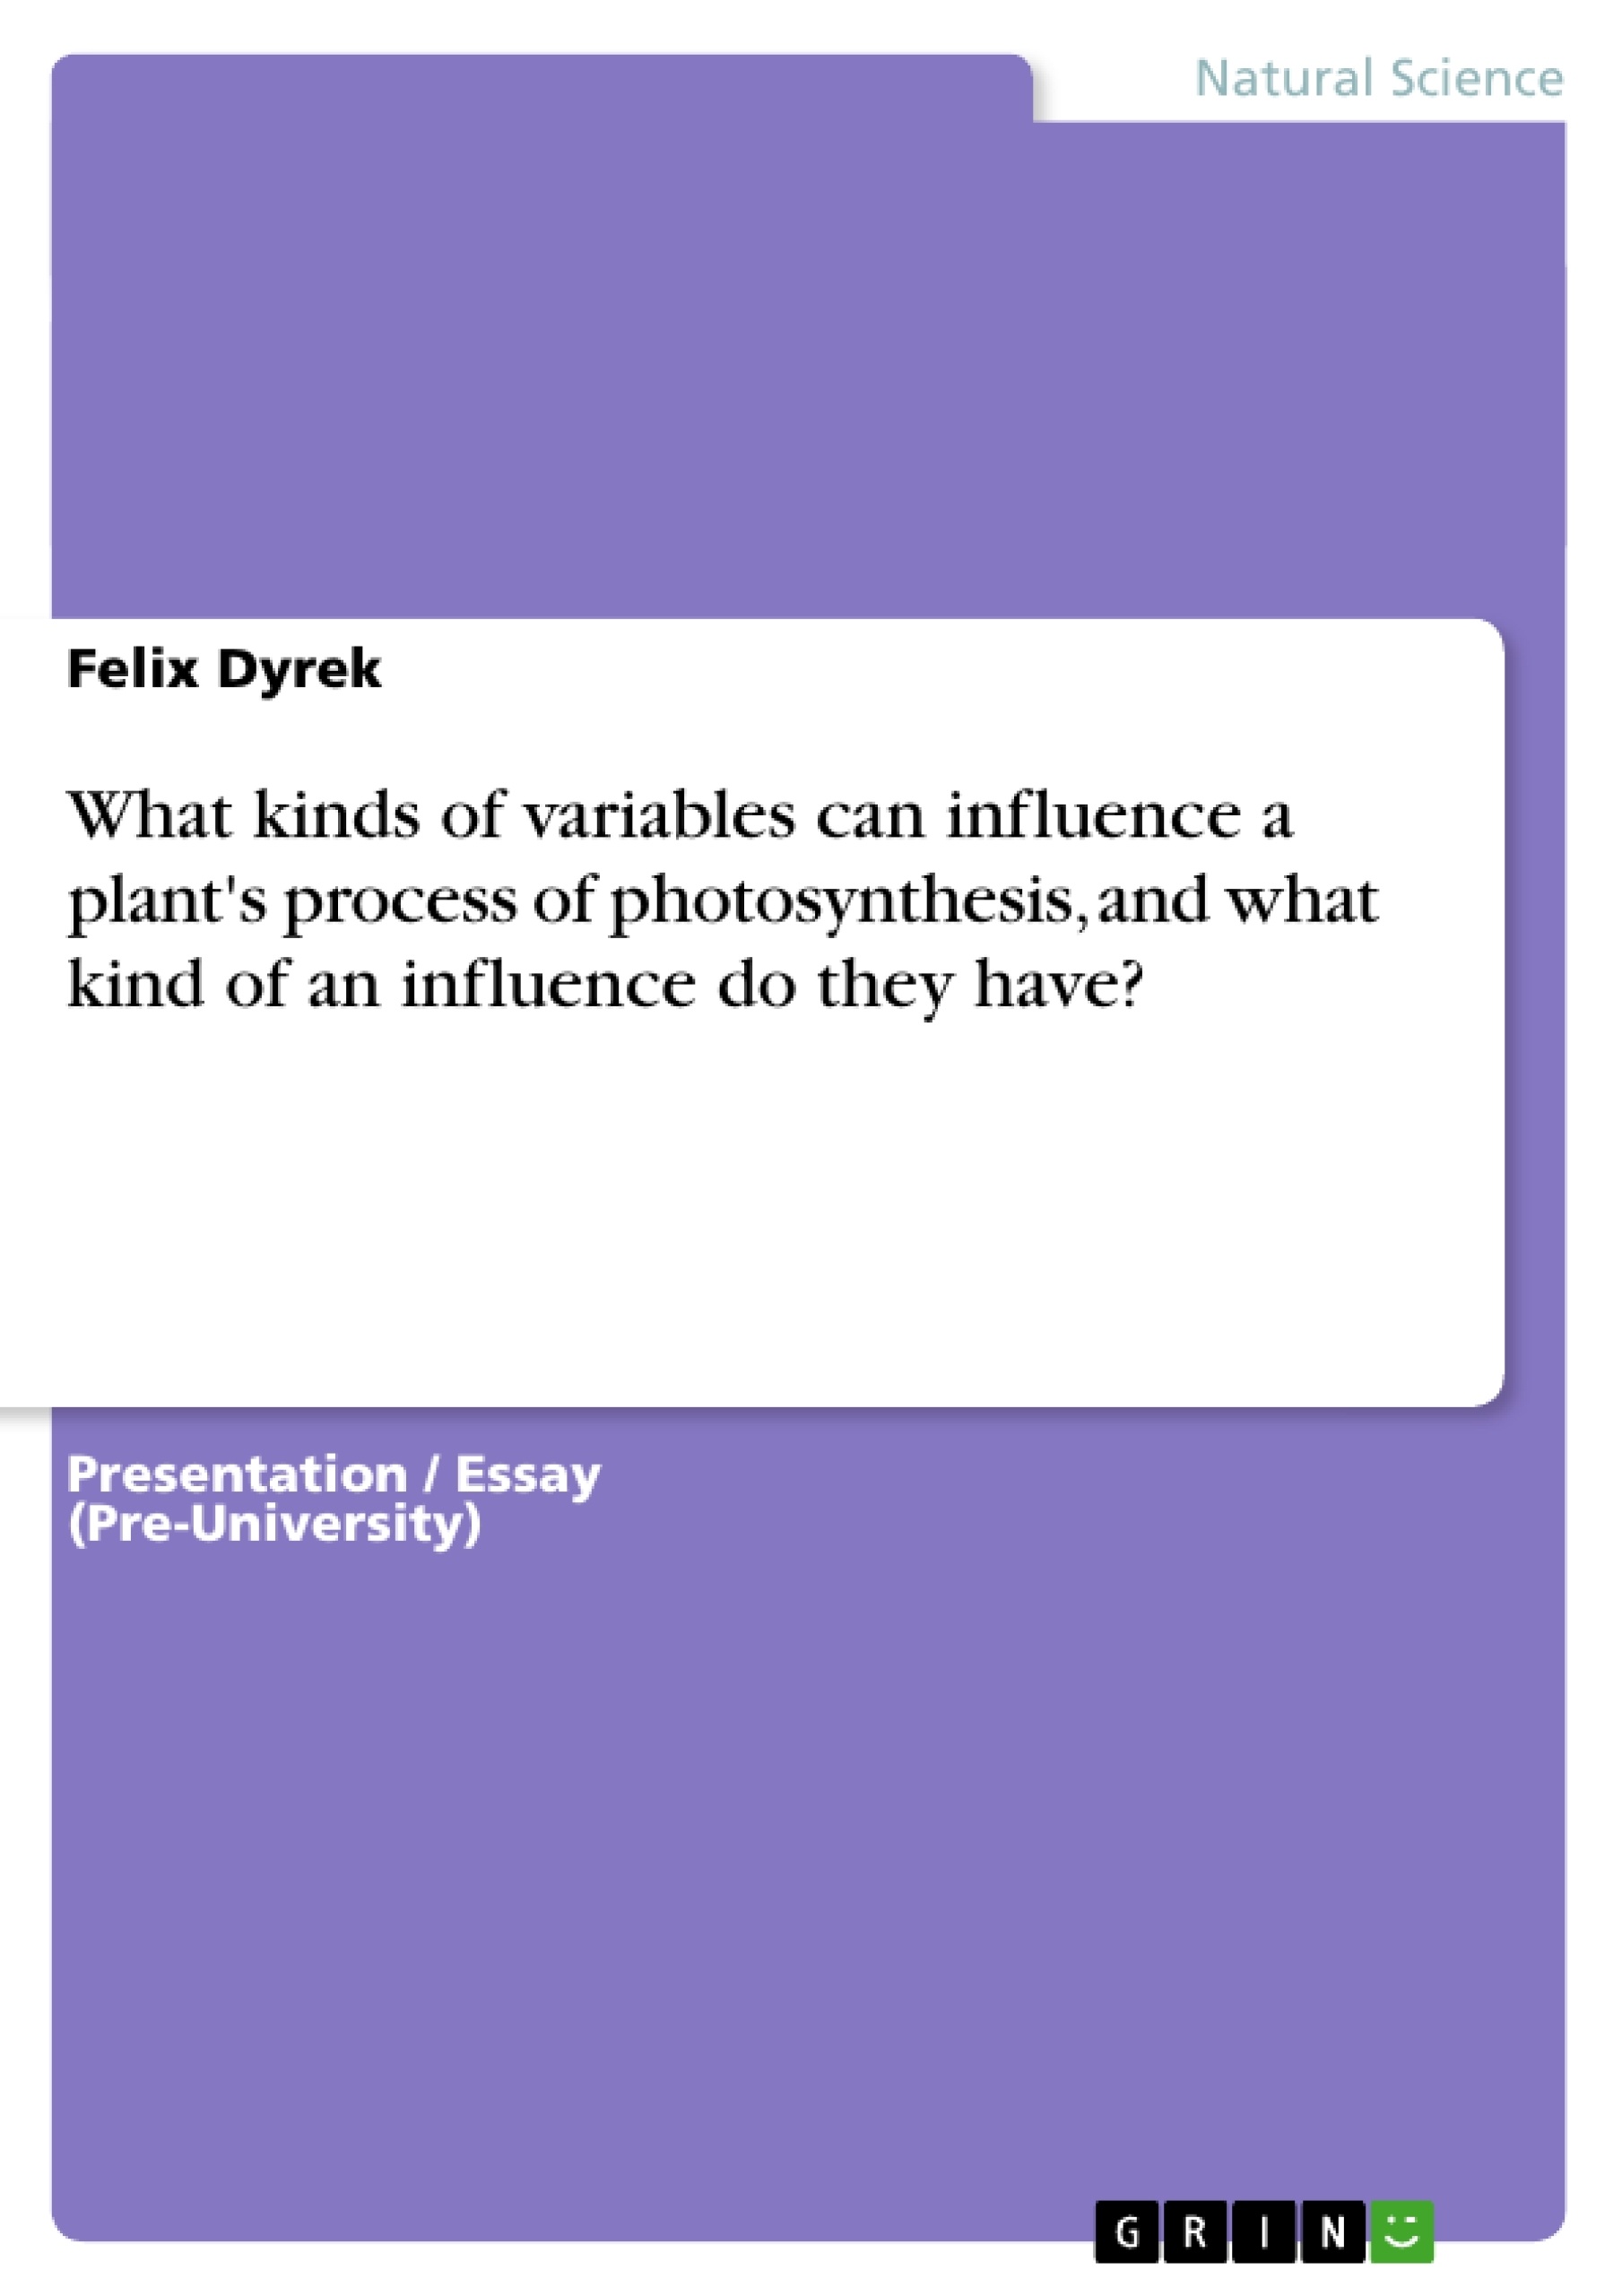 Título: What kinds of variables can influence a plant's process of photosynthesis, and what kind of an influence do they have?